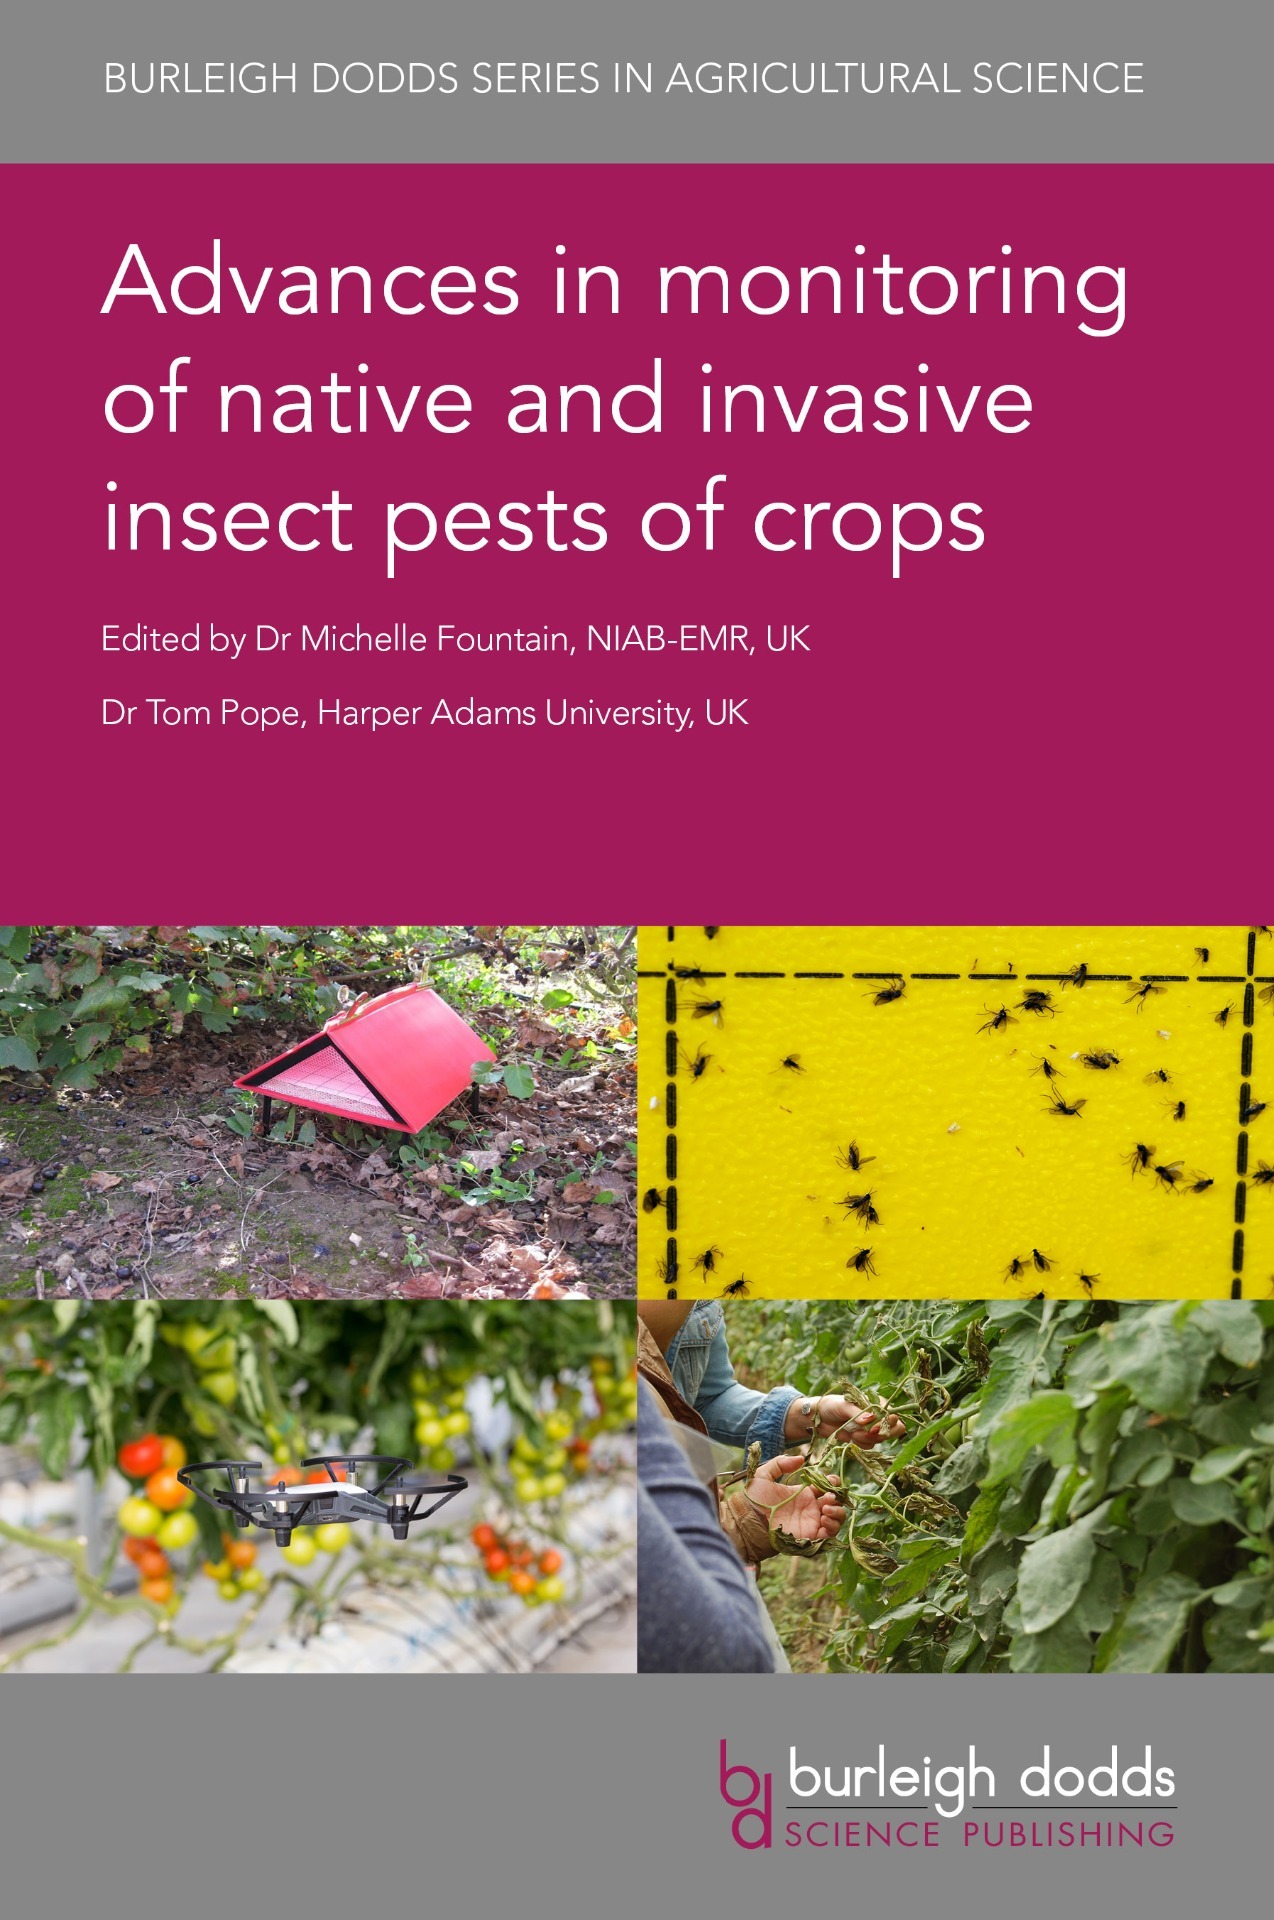 Advances in monitoring of native and invasive insect pests of crops